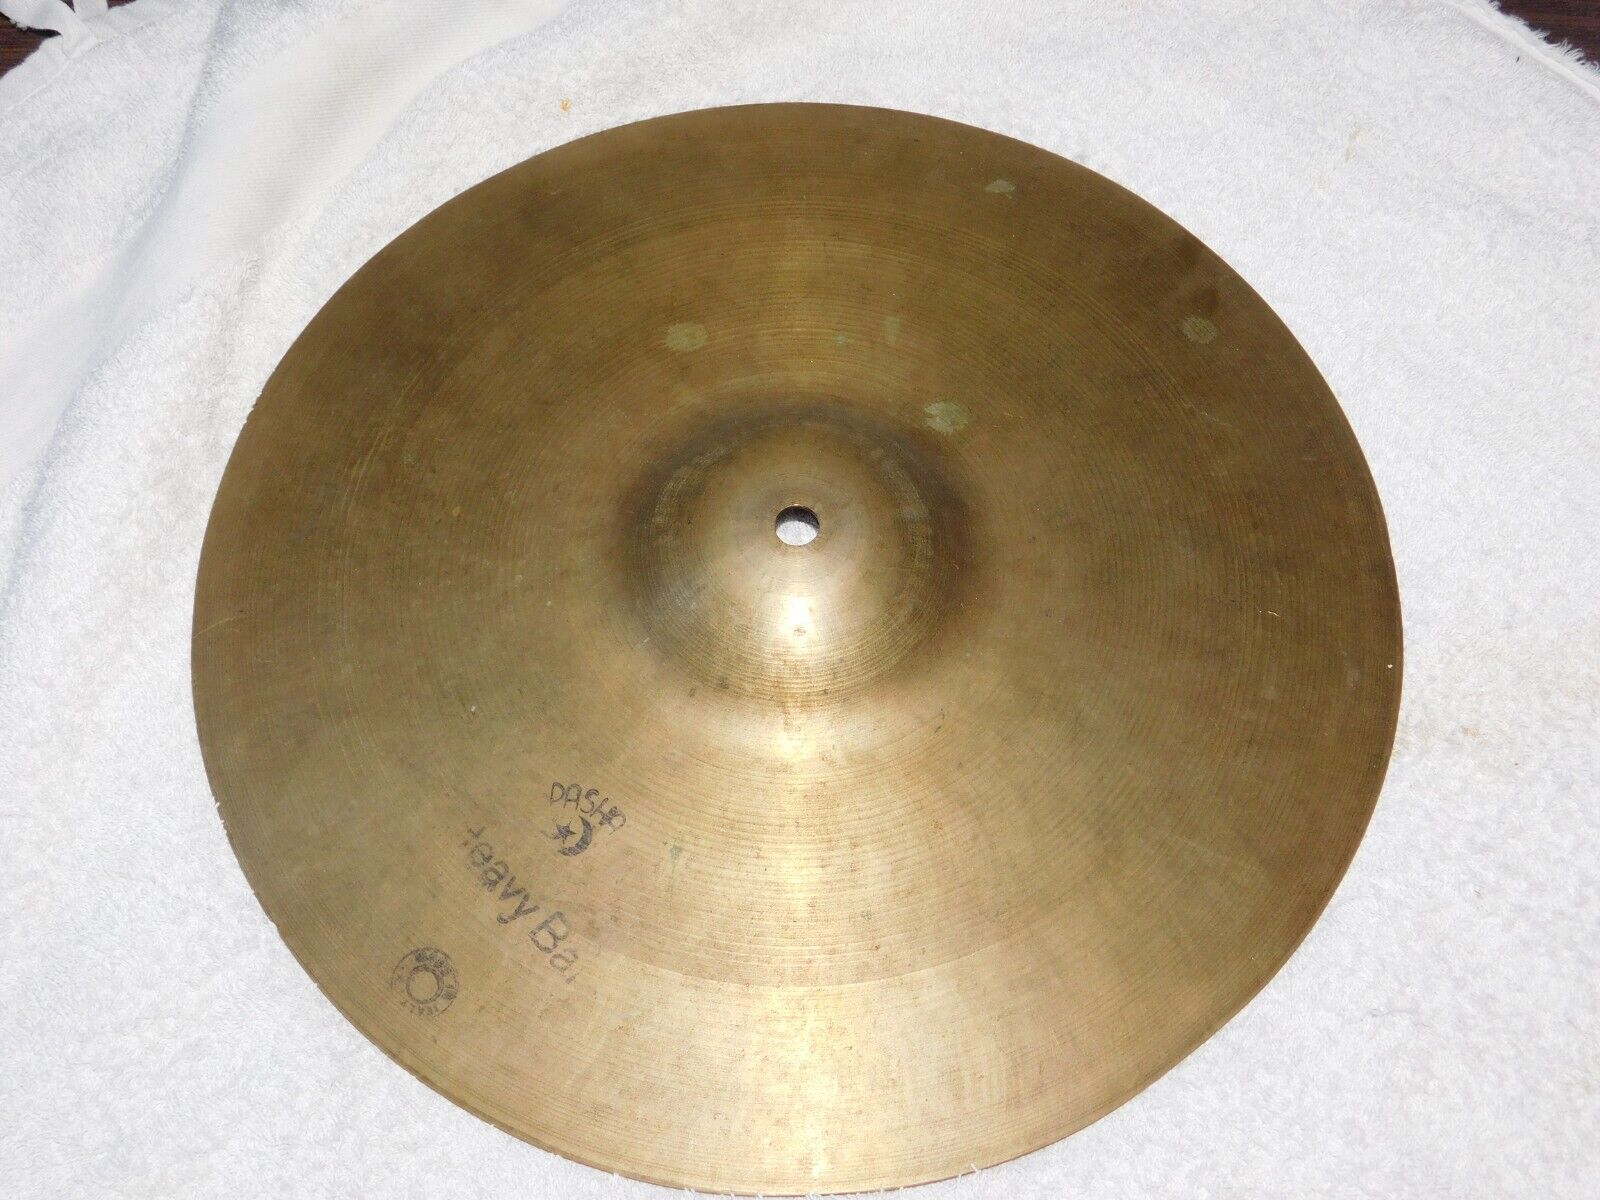 Pasha Vintage 13" 970g Cymbal Made In Italy For Rogers Drums In The 1960s/70s